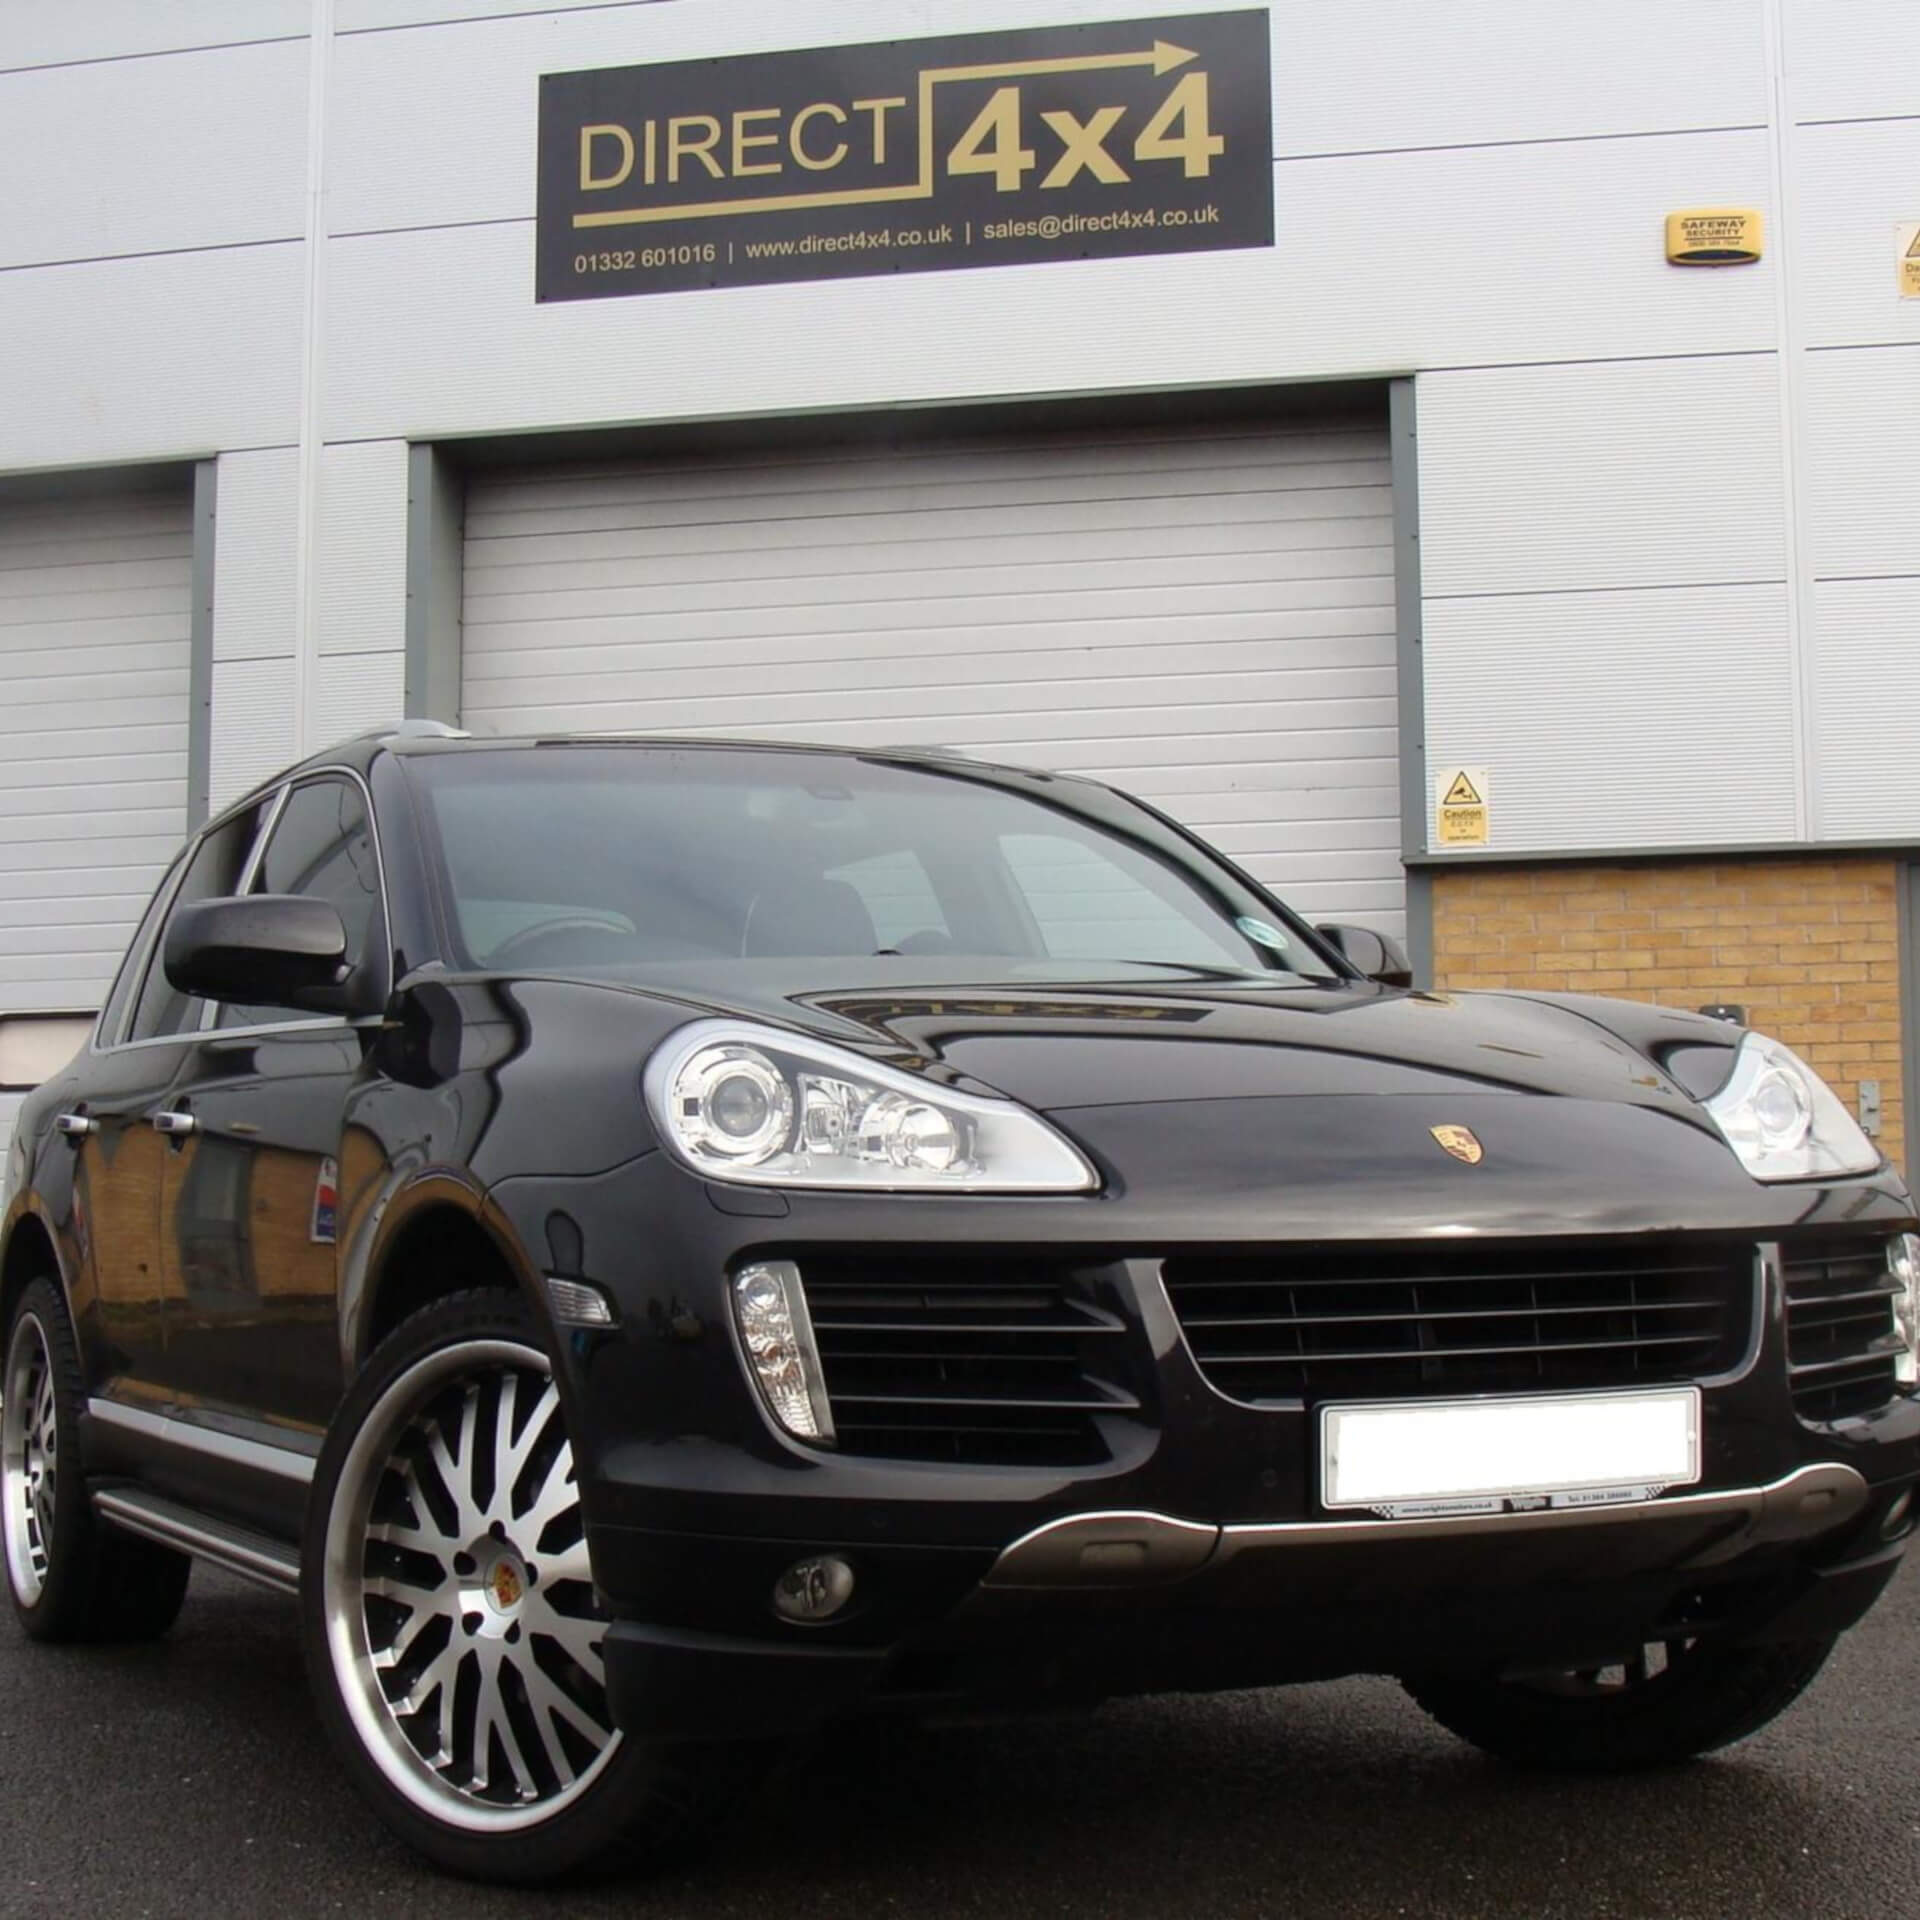 Direct4x4 accessories for Porsche Cayenne vehicles with a photo of a black Porsche Cayenne parked outside our offices